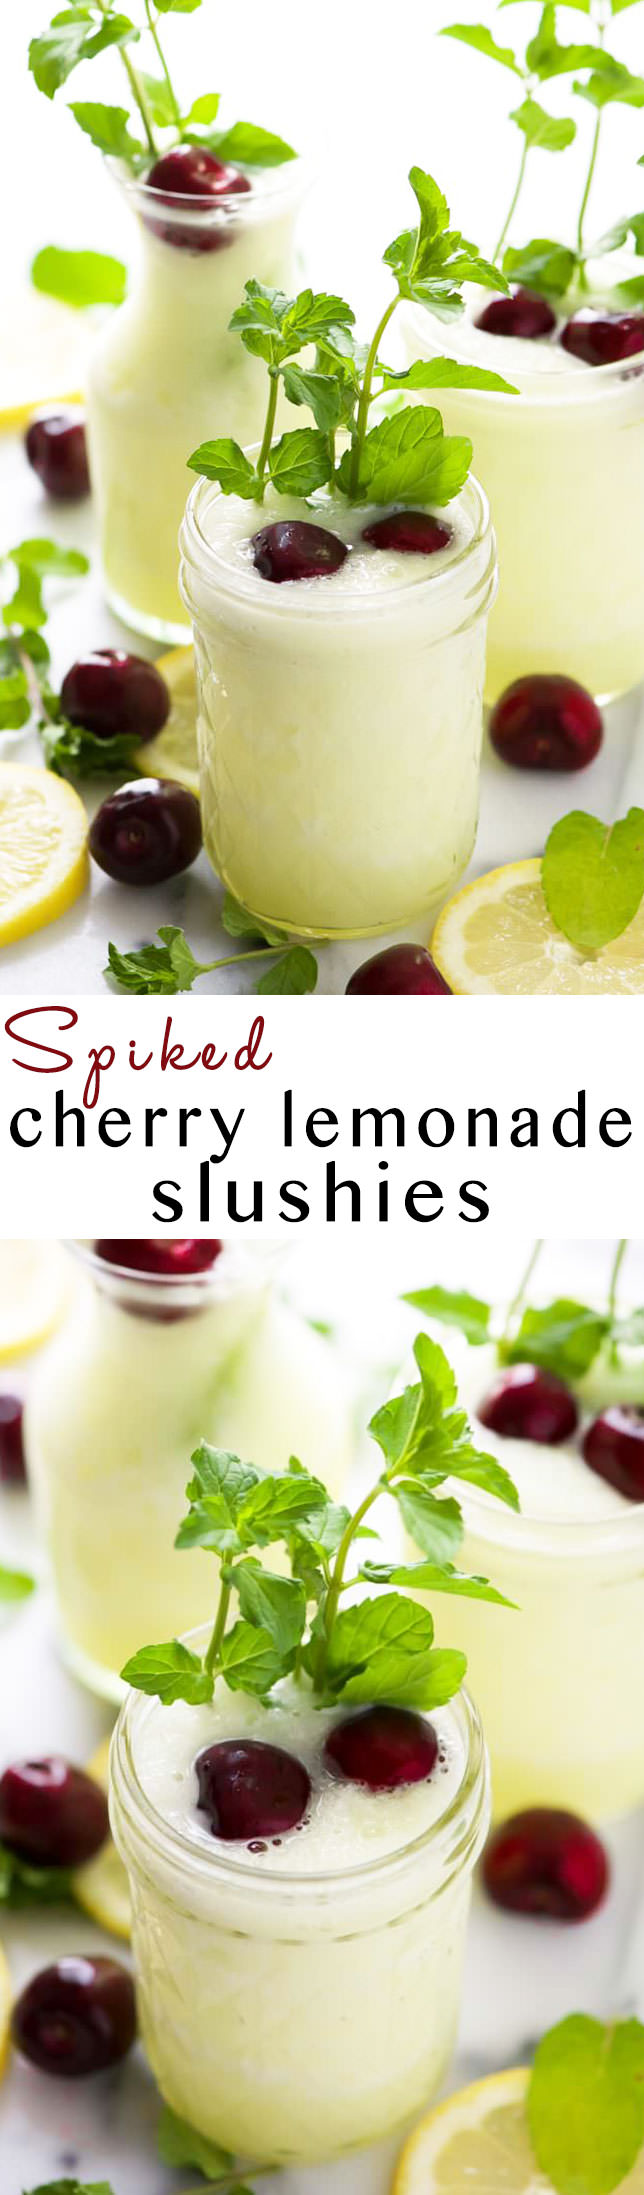  A skinny and refreshing summer treat made with lemonade and cherry vodka. A grown up slushie that will be perfect for hot summer days!